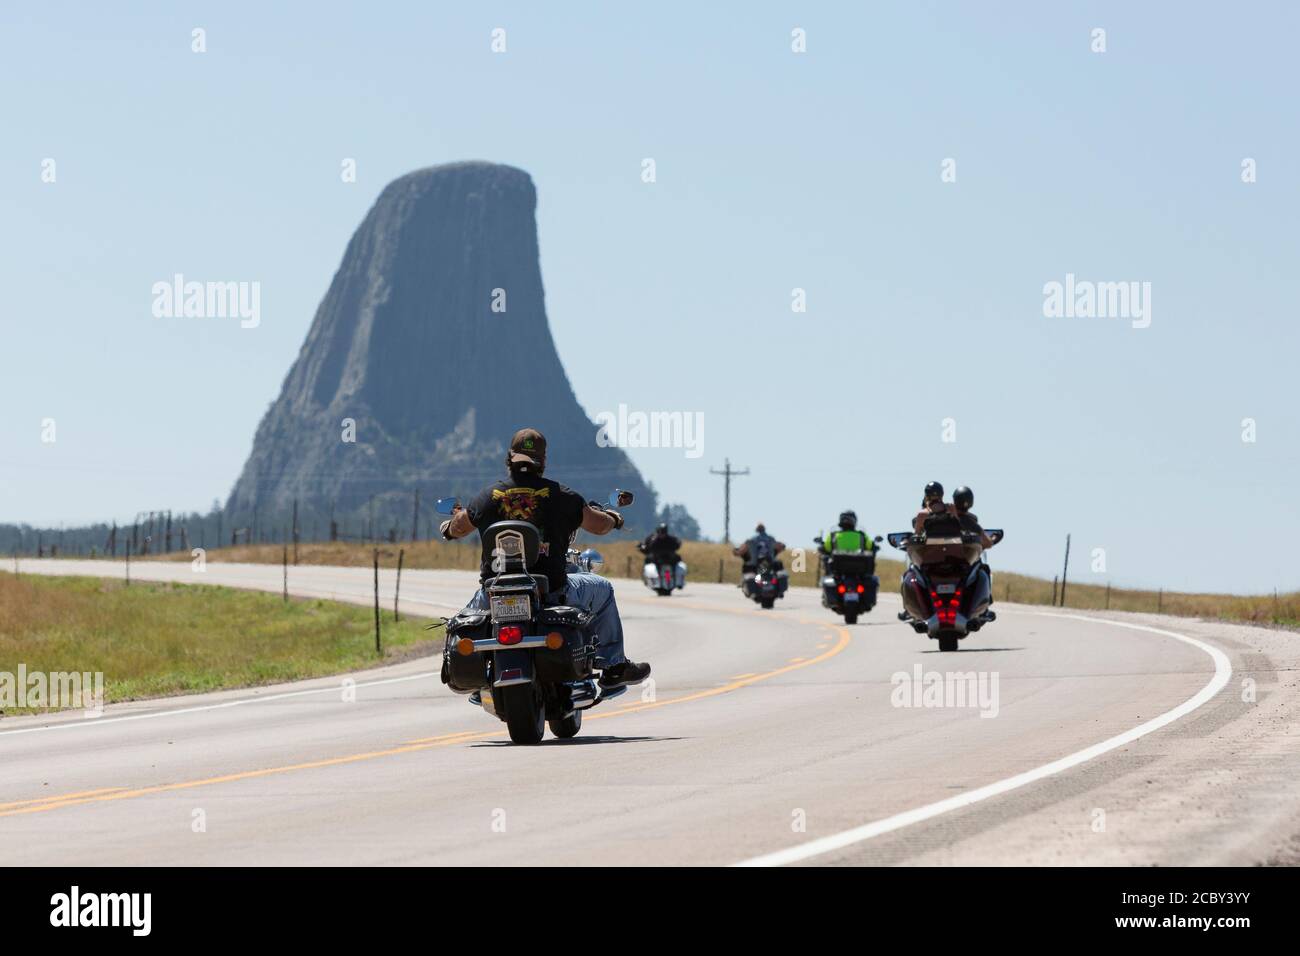 Bikers cruise along Highway 24 near Wyoming’s Devils Tower on Friday, August 14, 2020. Every year, bikers who attend the nearby Sturgis Motorcycle Rally in South Dakota descend on the iconic landmark. Stock Photo